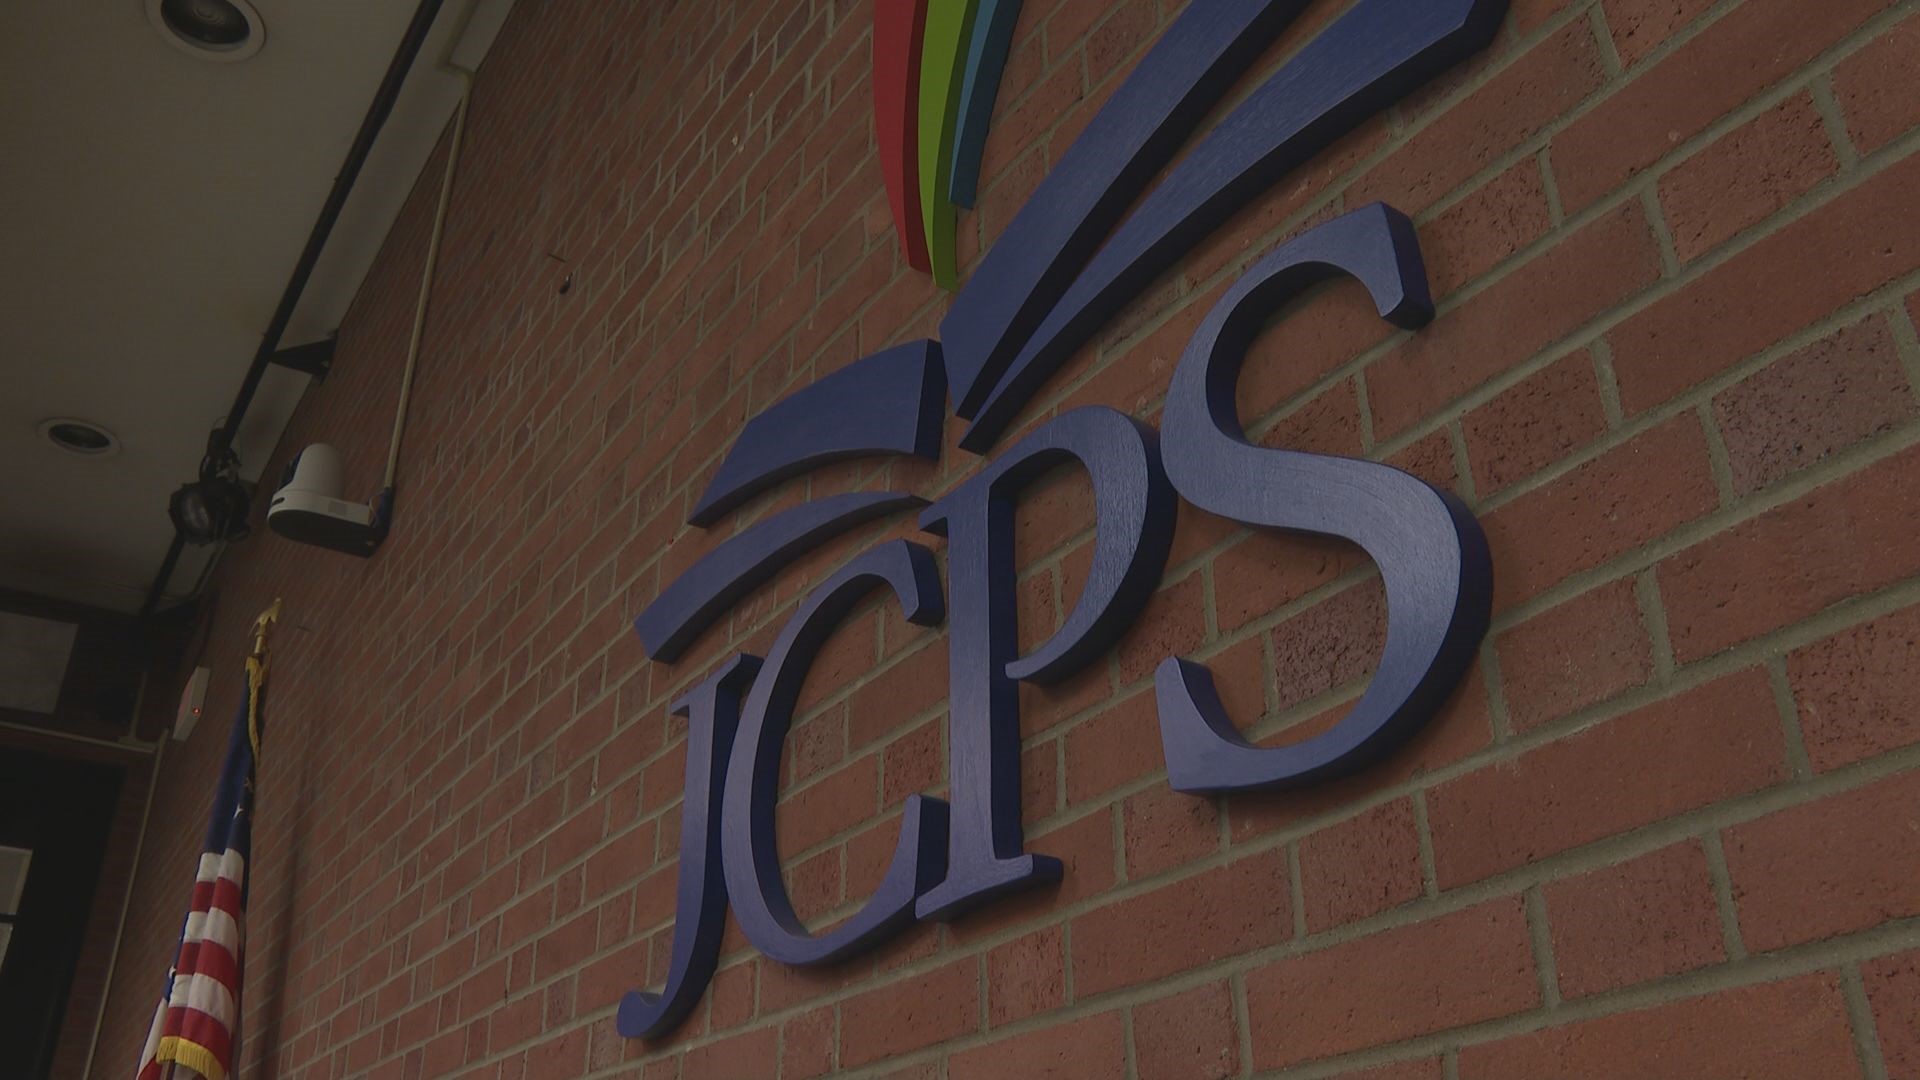 Should lawmakers be able to strip power away from local school districts? The JCPS Board has filed a lawsuit against controversial SB 1.